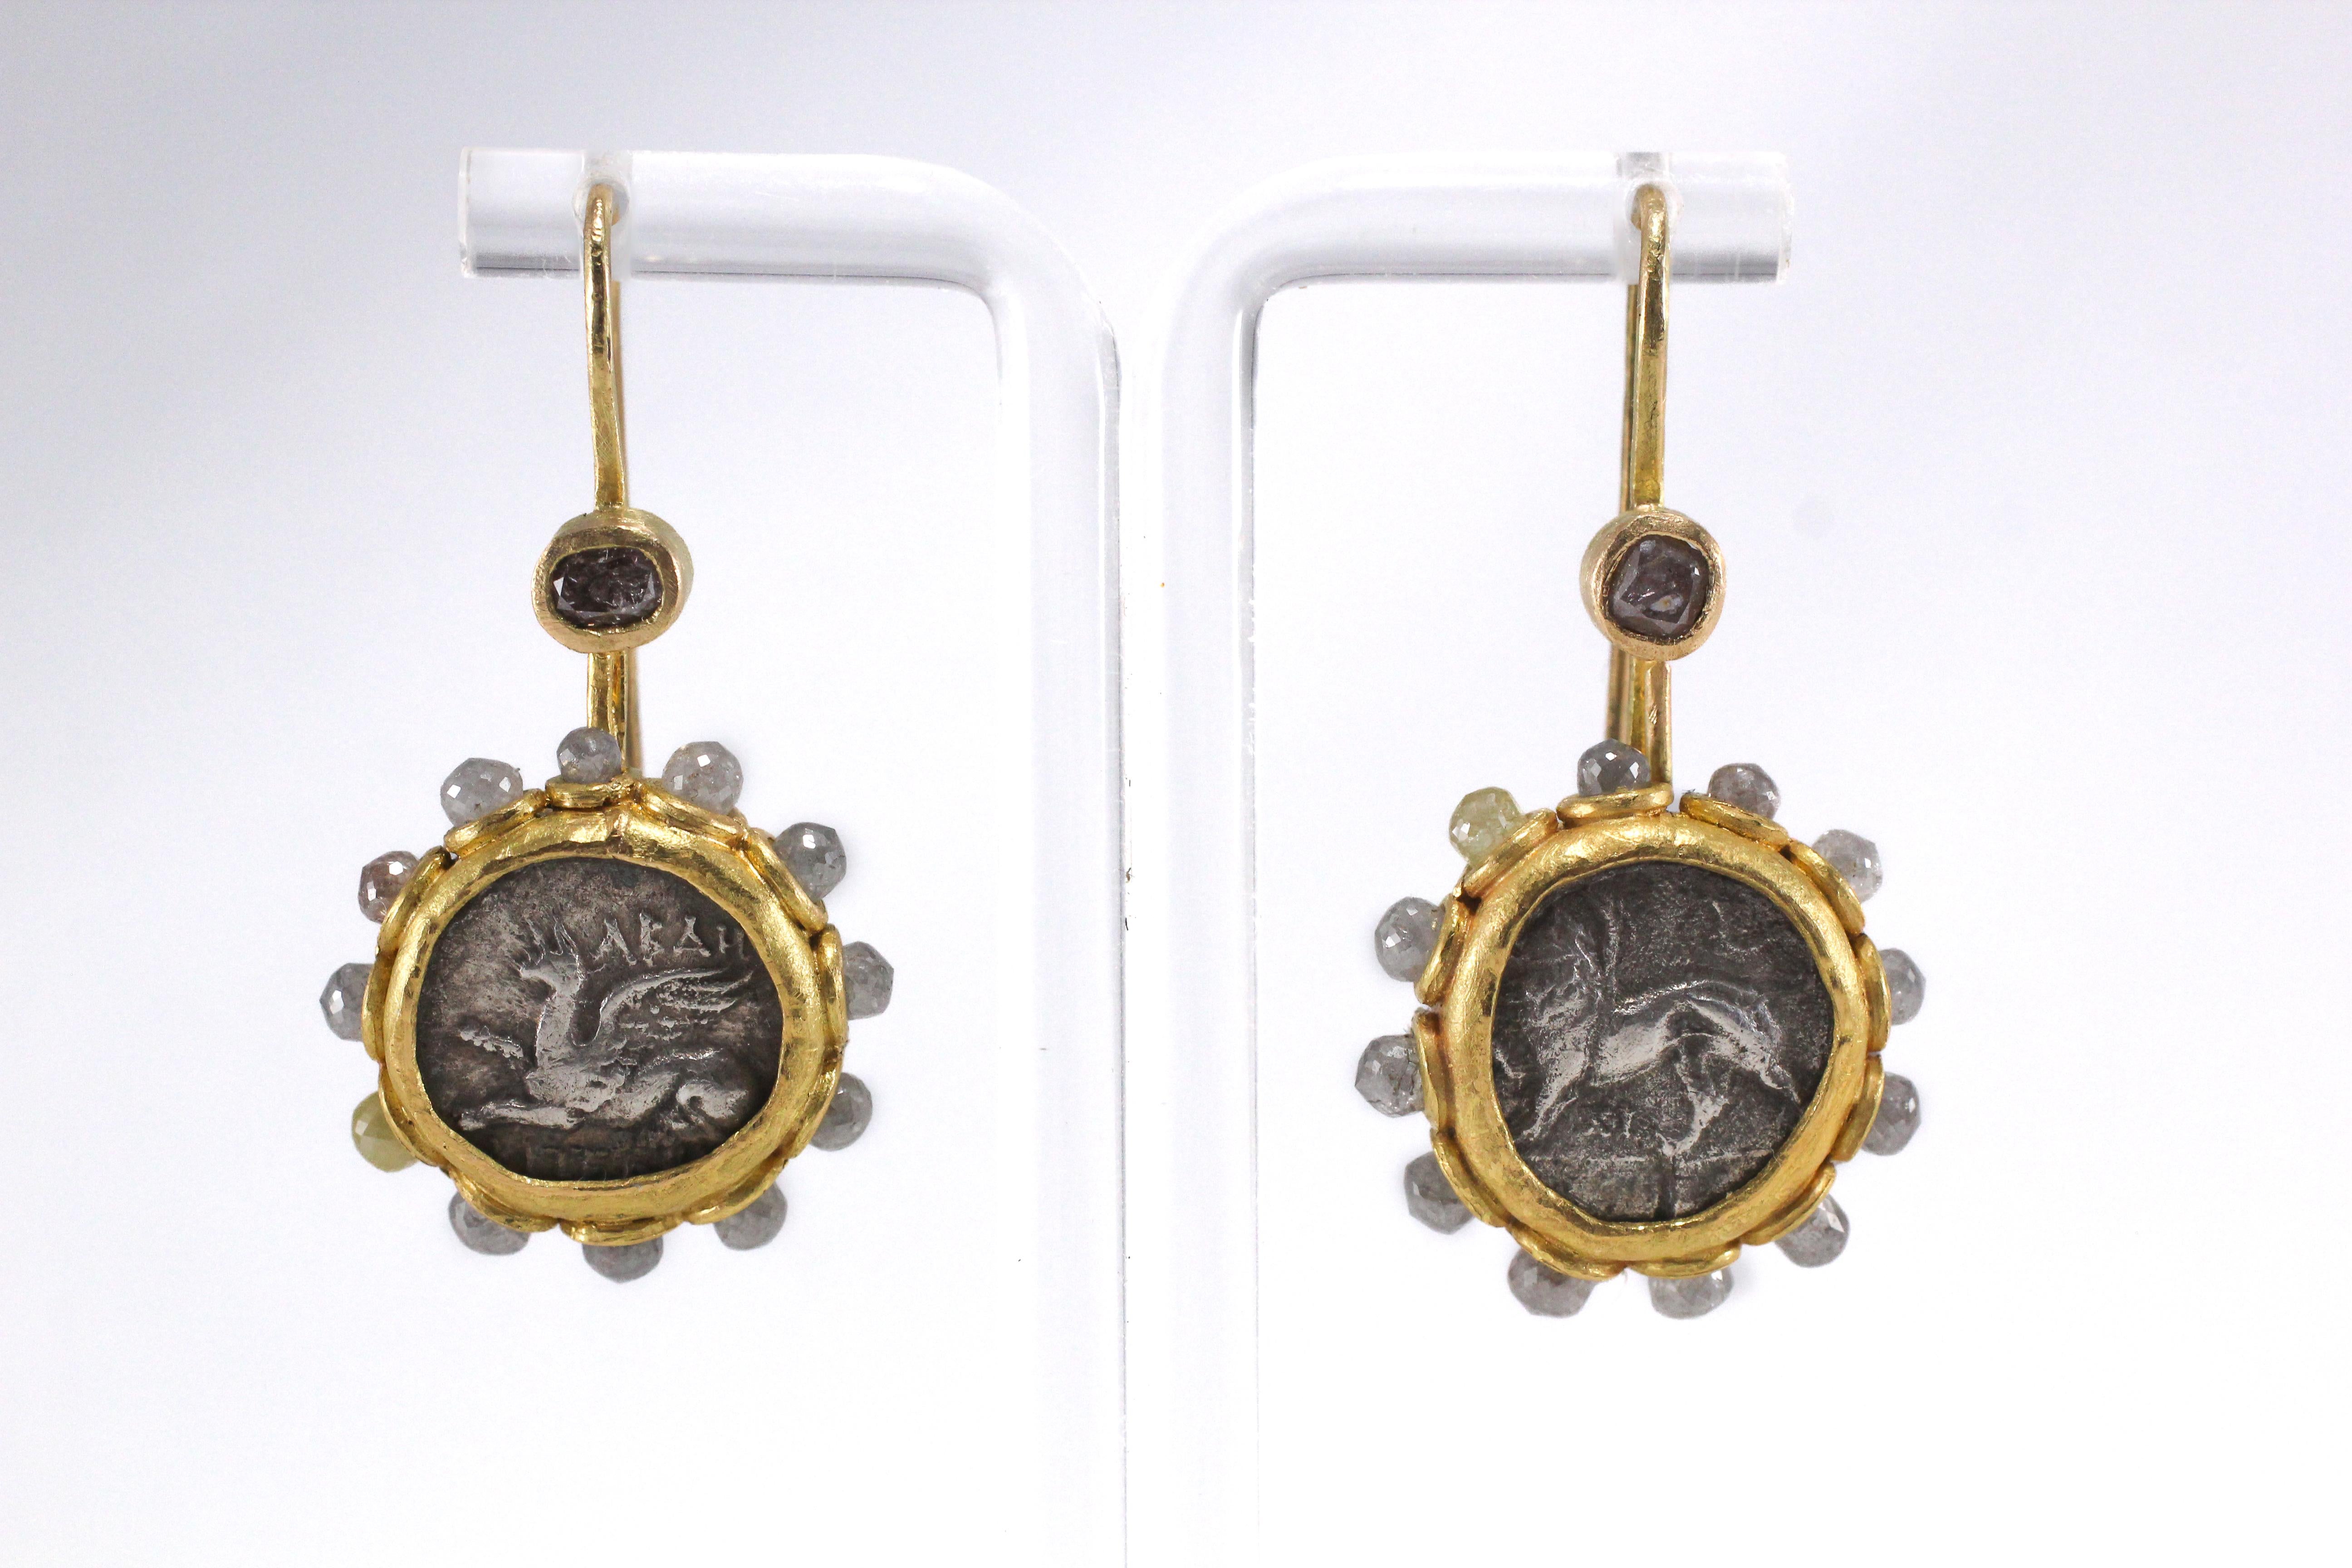 Mystery of Time. Fun, asymmetrical diamond 21k solid gold dangle drop earrings featuring Archaic Greek coins and grey diamond briolettes. Perfect for every day. Their neutral subtle color allows easy coordination with any outfit. Show off your